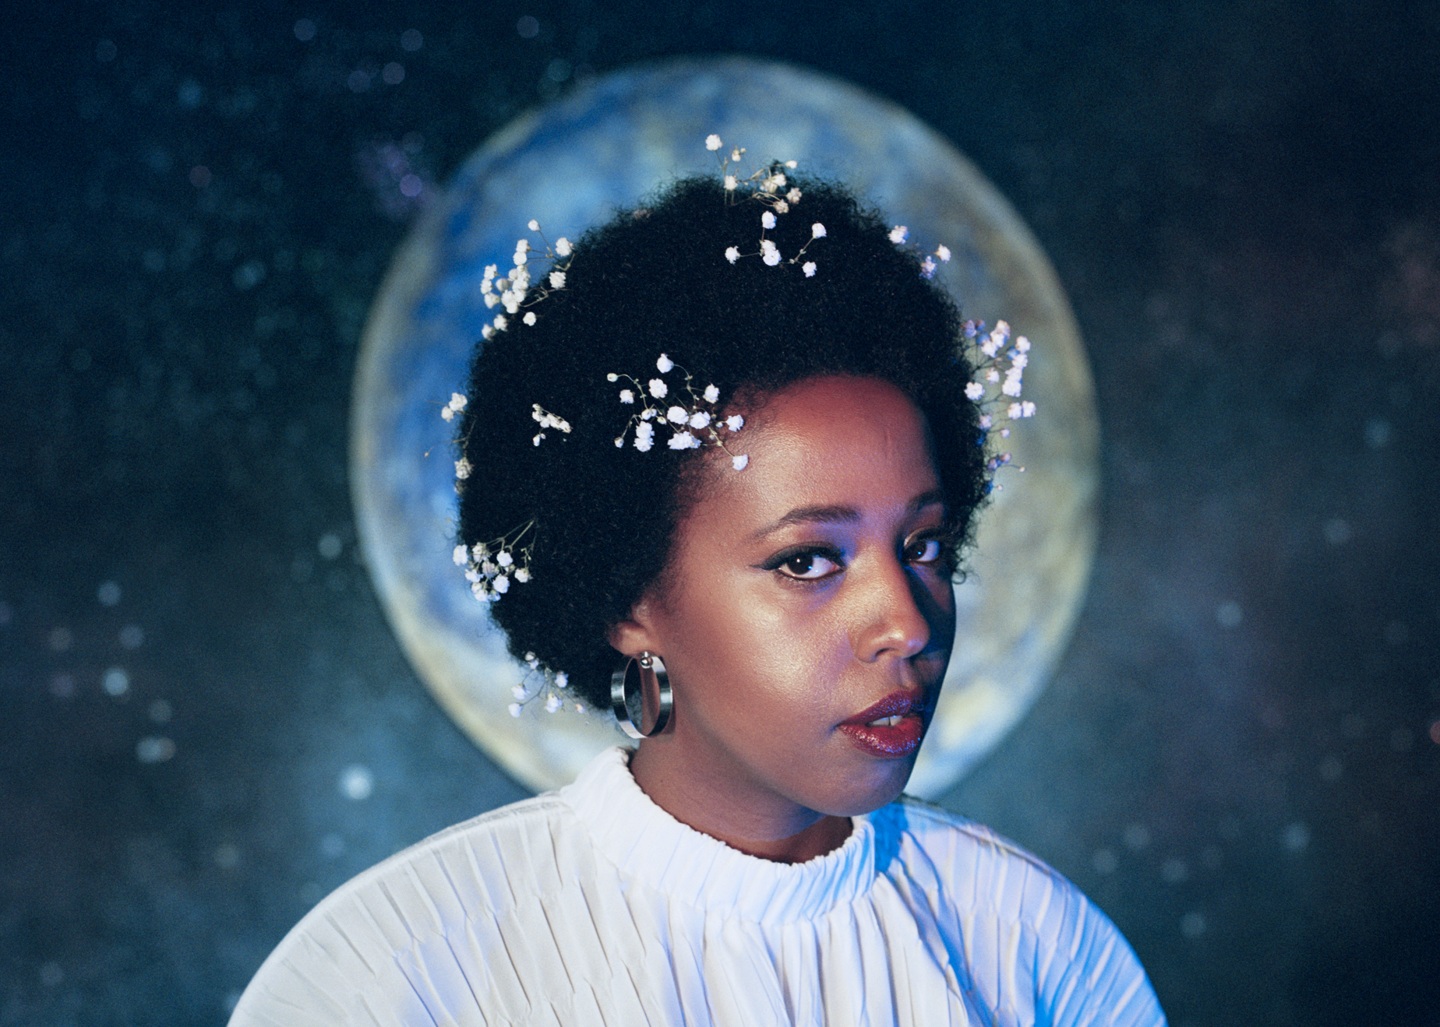 How Cold Specks Drew From The Richness Of Somali Music To Make Her Best Album